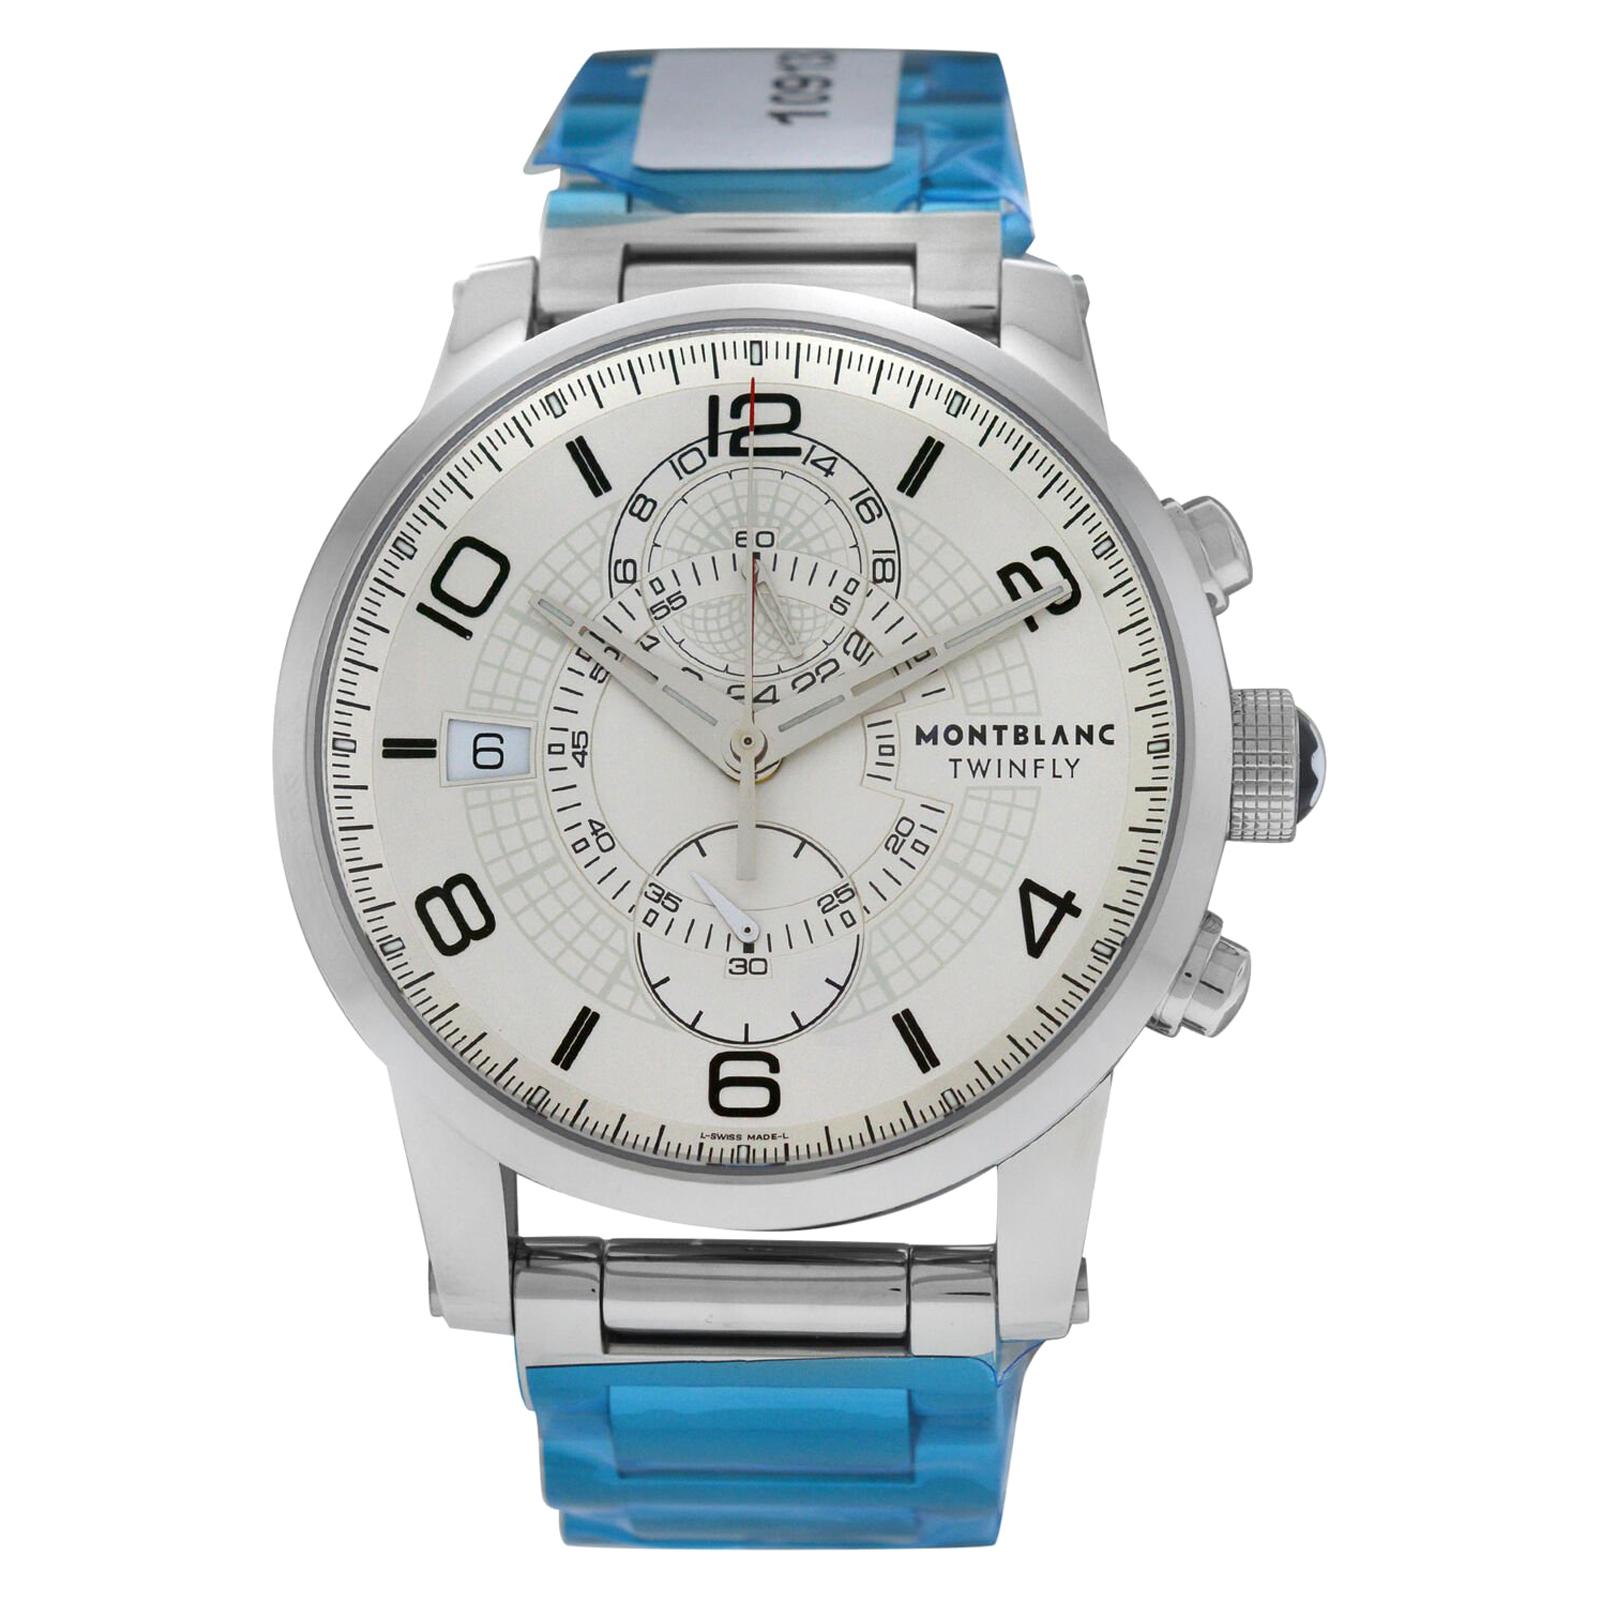 Men's Montblanc Twinfly 109133 Steel Flyback Chrono Watch For Sale at ...